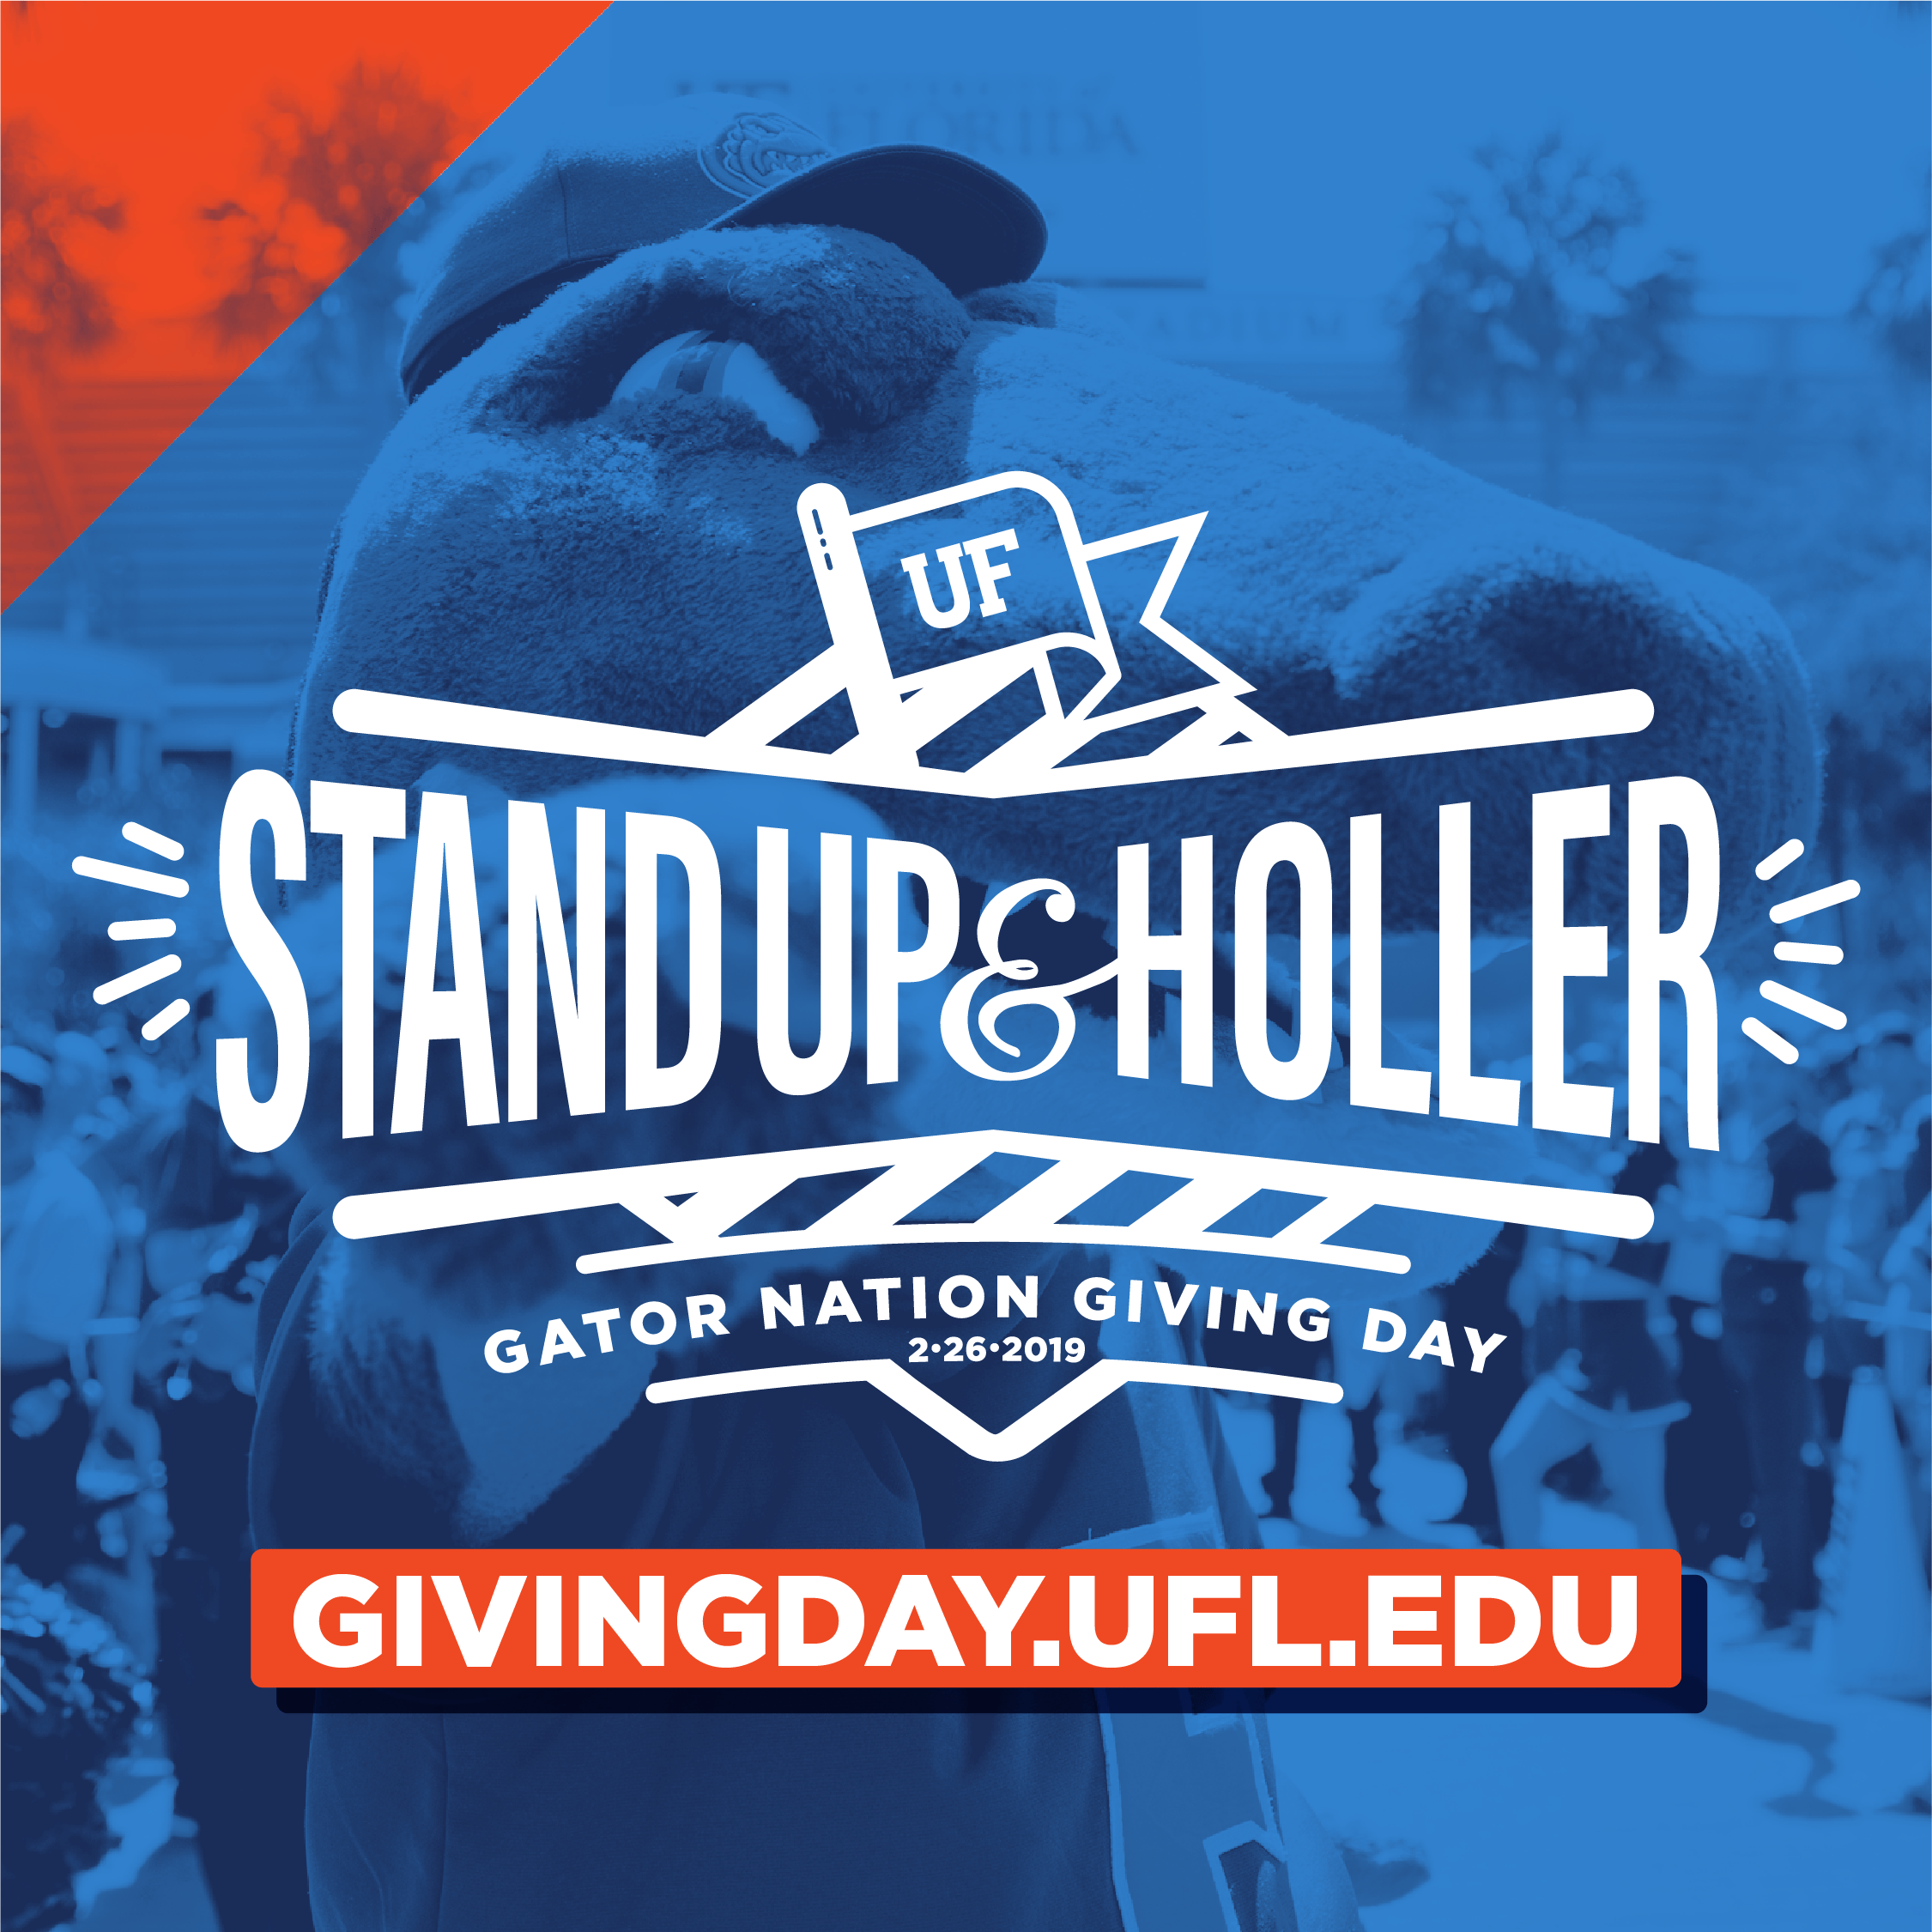 GatorNation Logo - Stand Up & Holler: Gator Nation Giving Day is Feb. 26